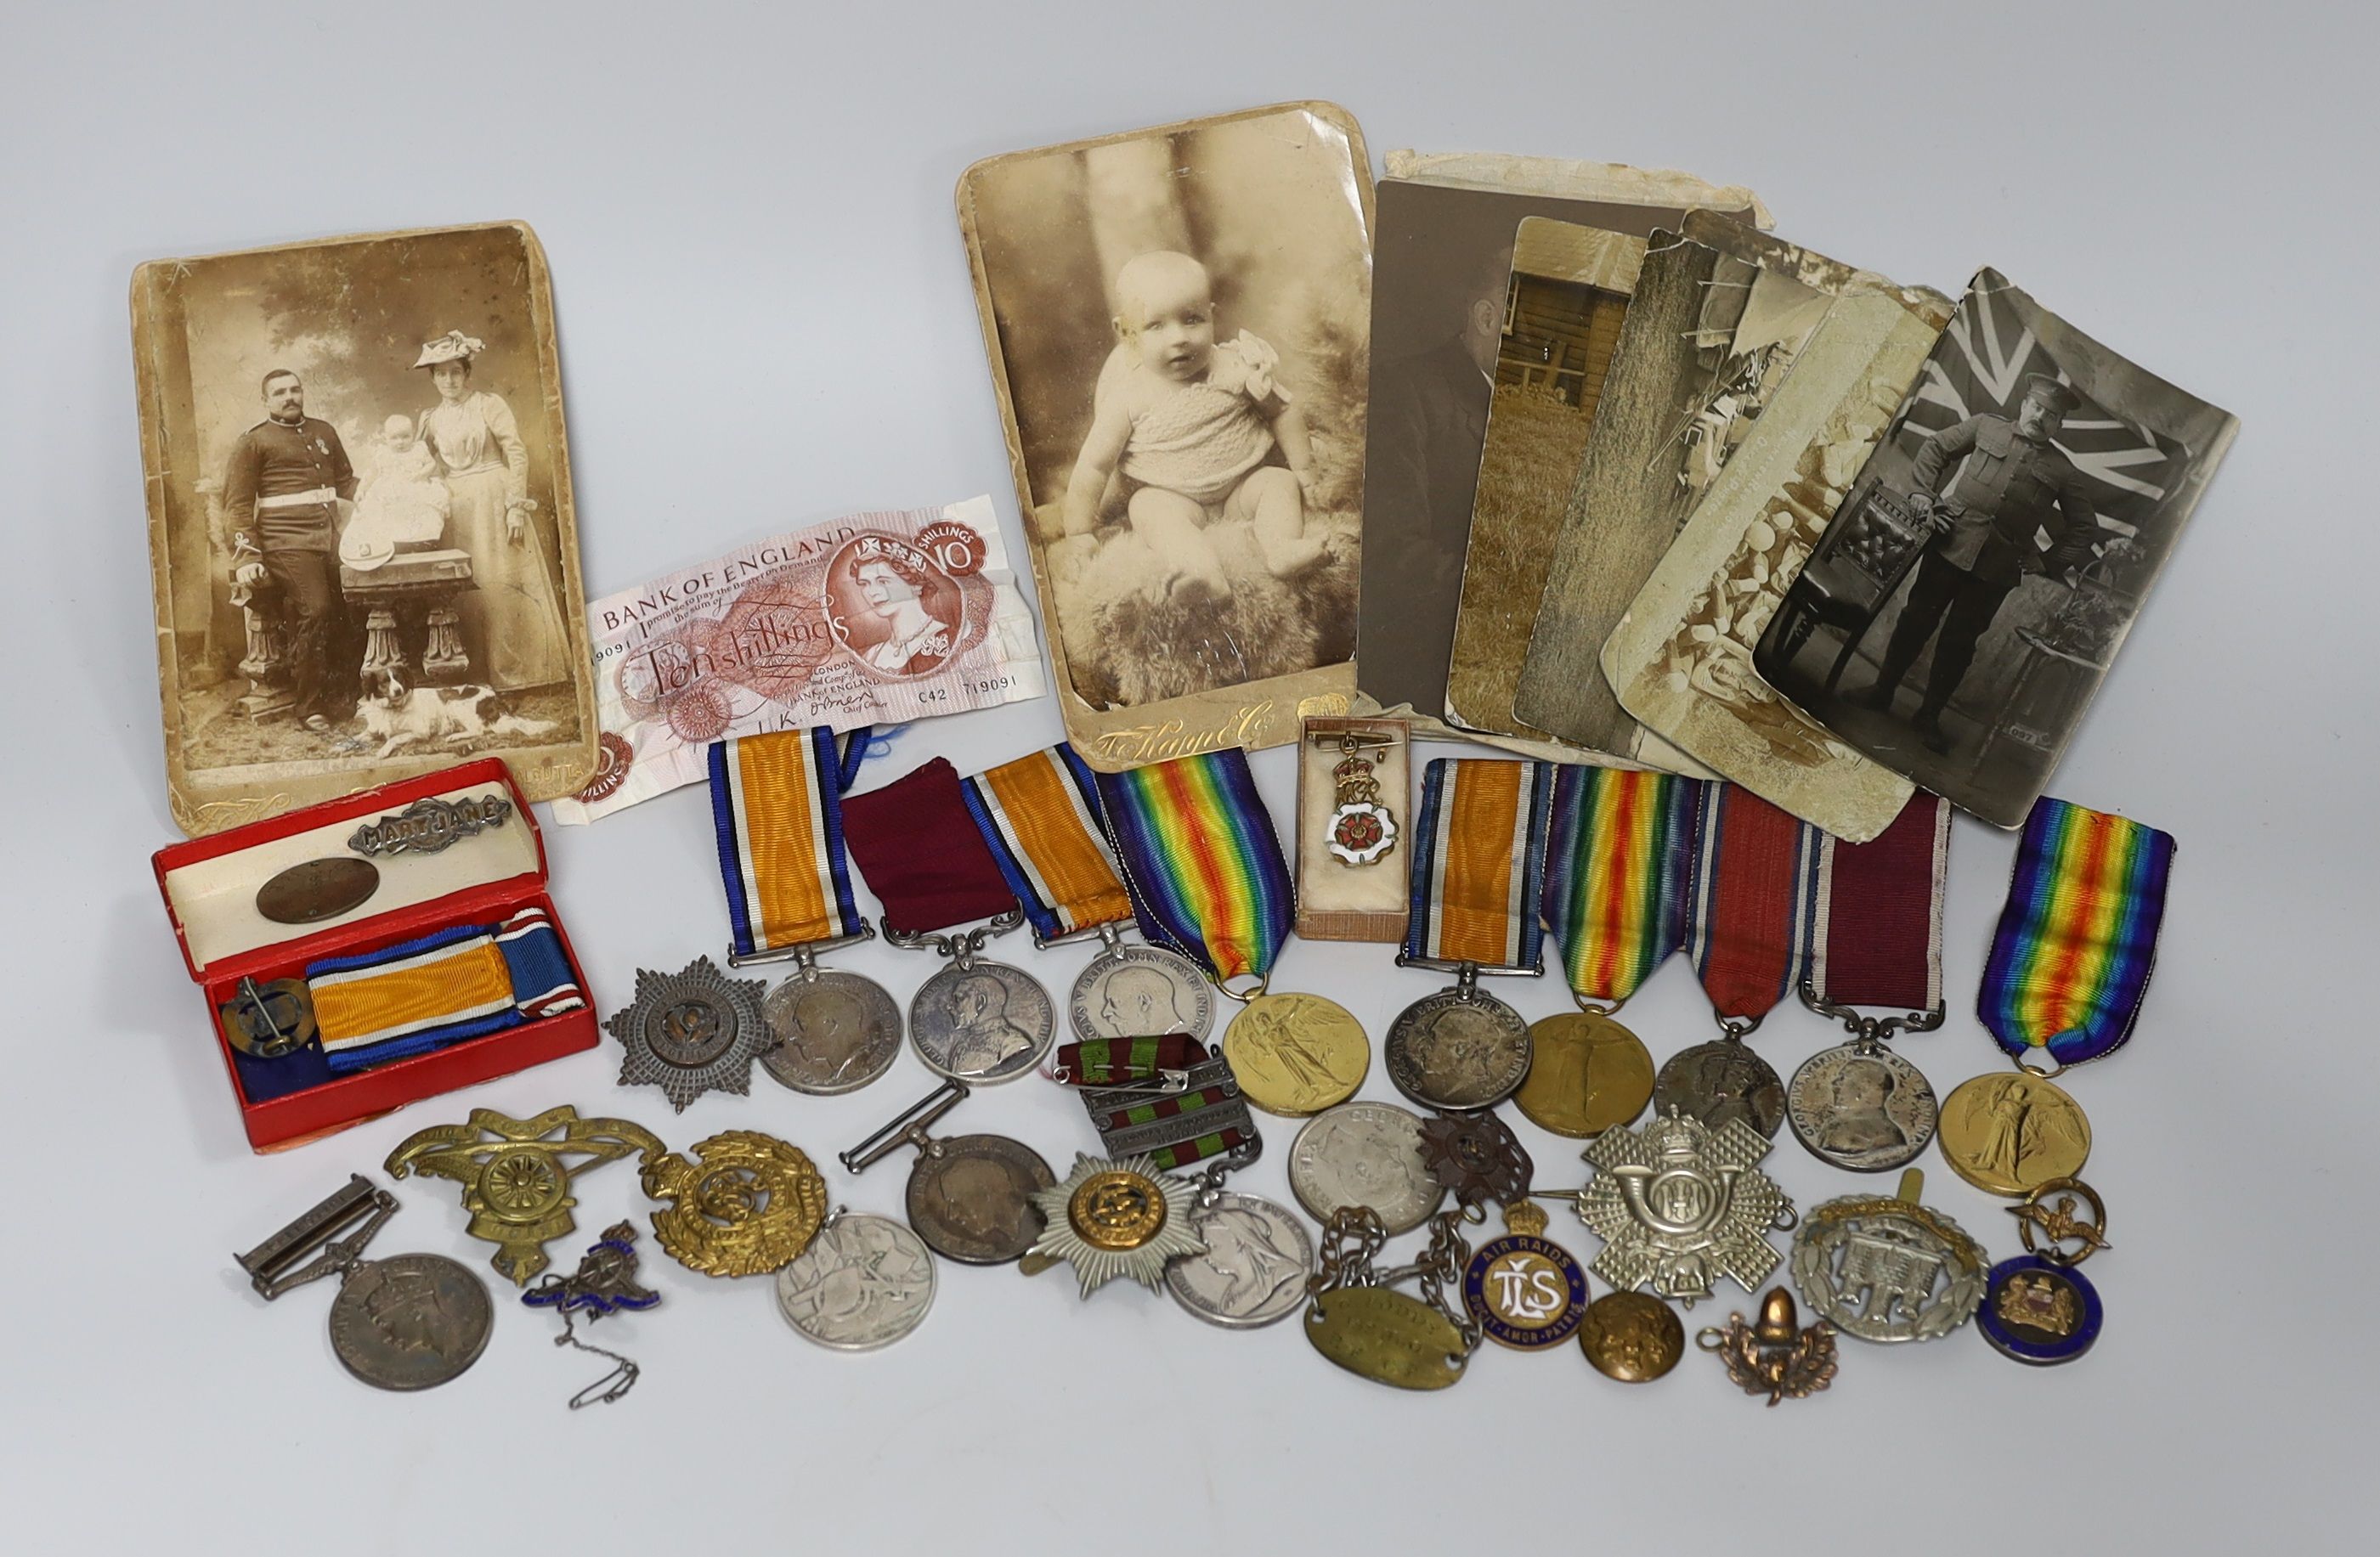 An India campaign medal and a long service and good conduct medal both awarded to 4838 PTE W.J.